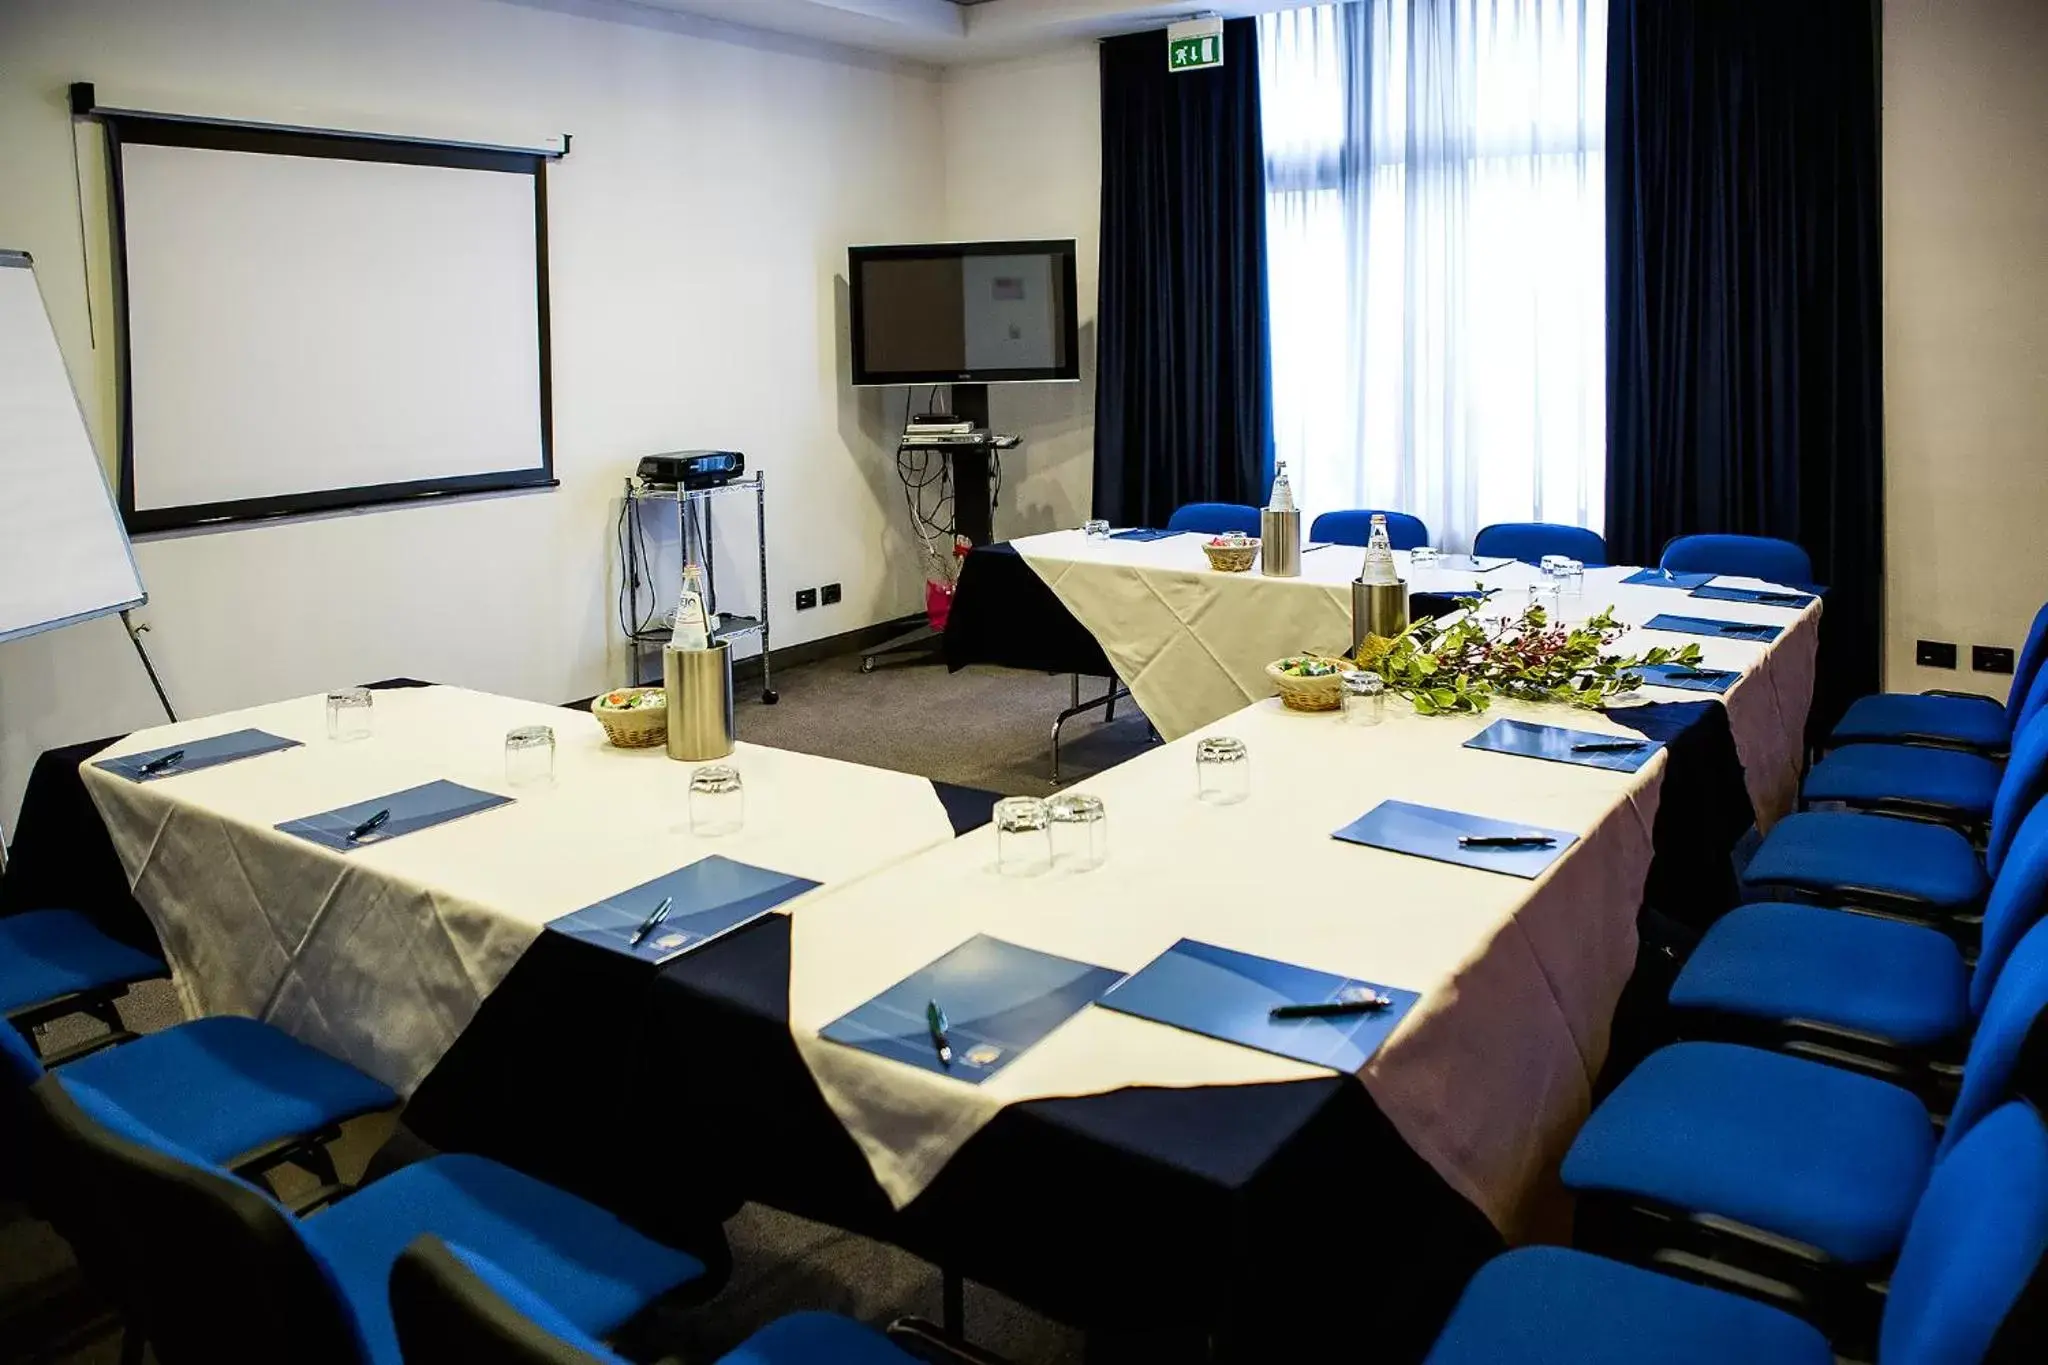 Meeting/conference room in MH Hotel Piacenza Fiera